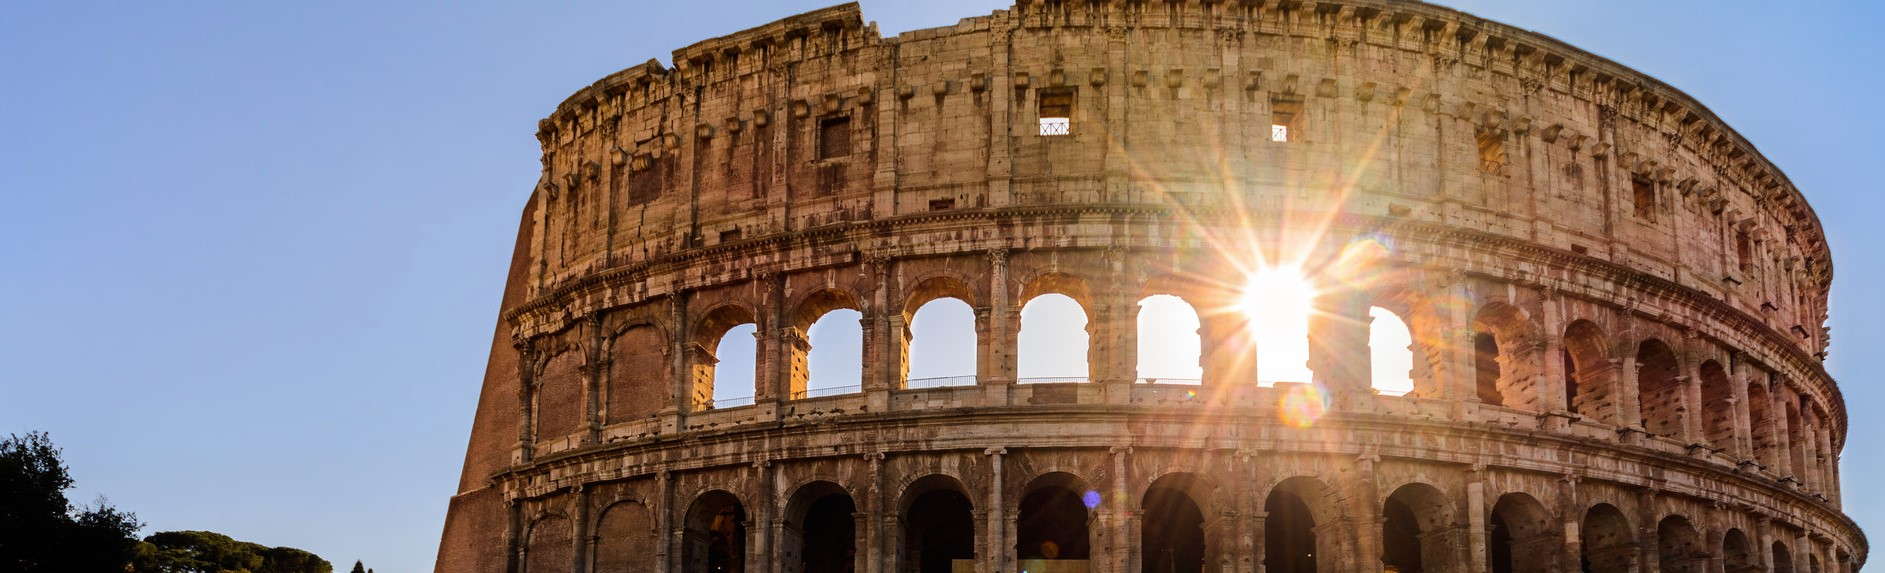 Our Best Tours Around Rome Are Available Now